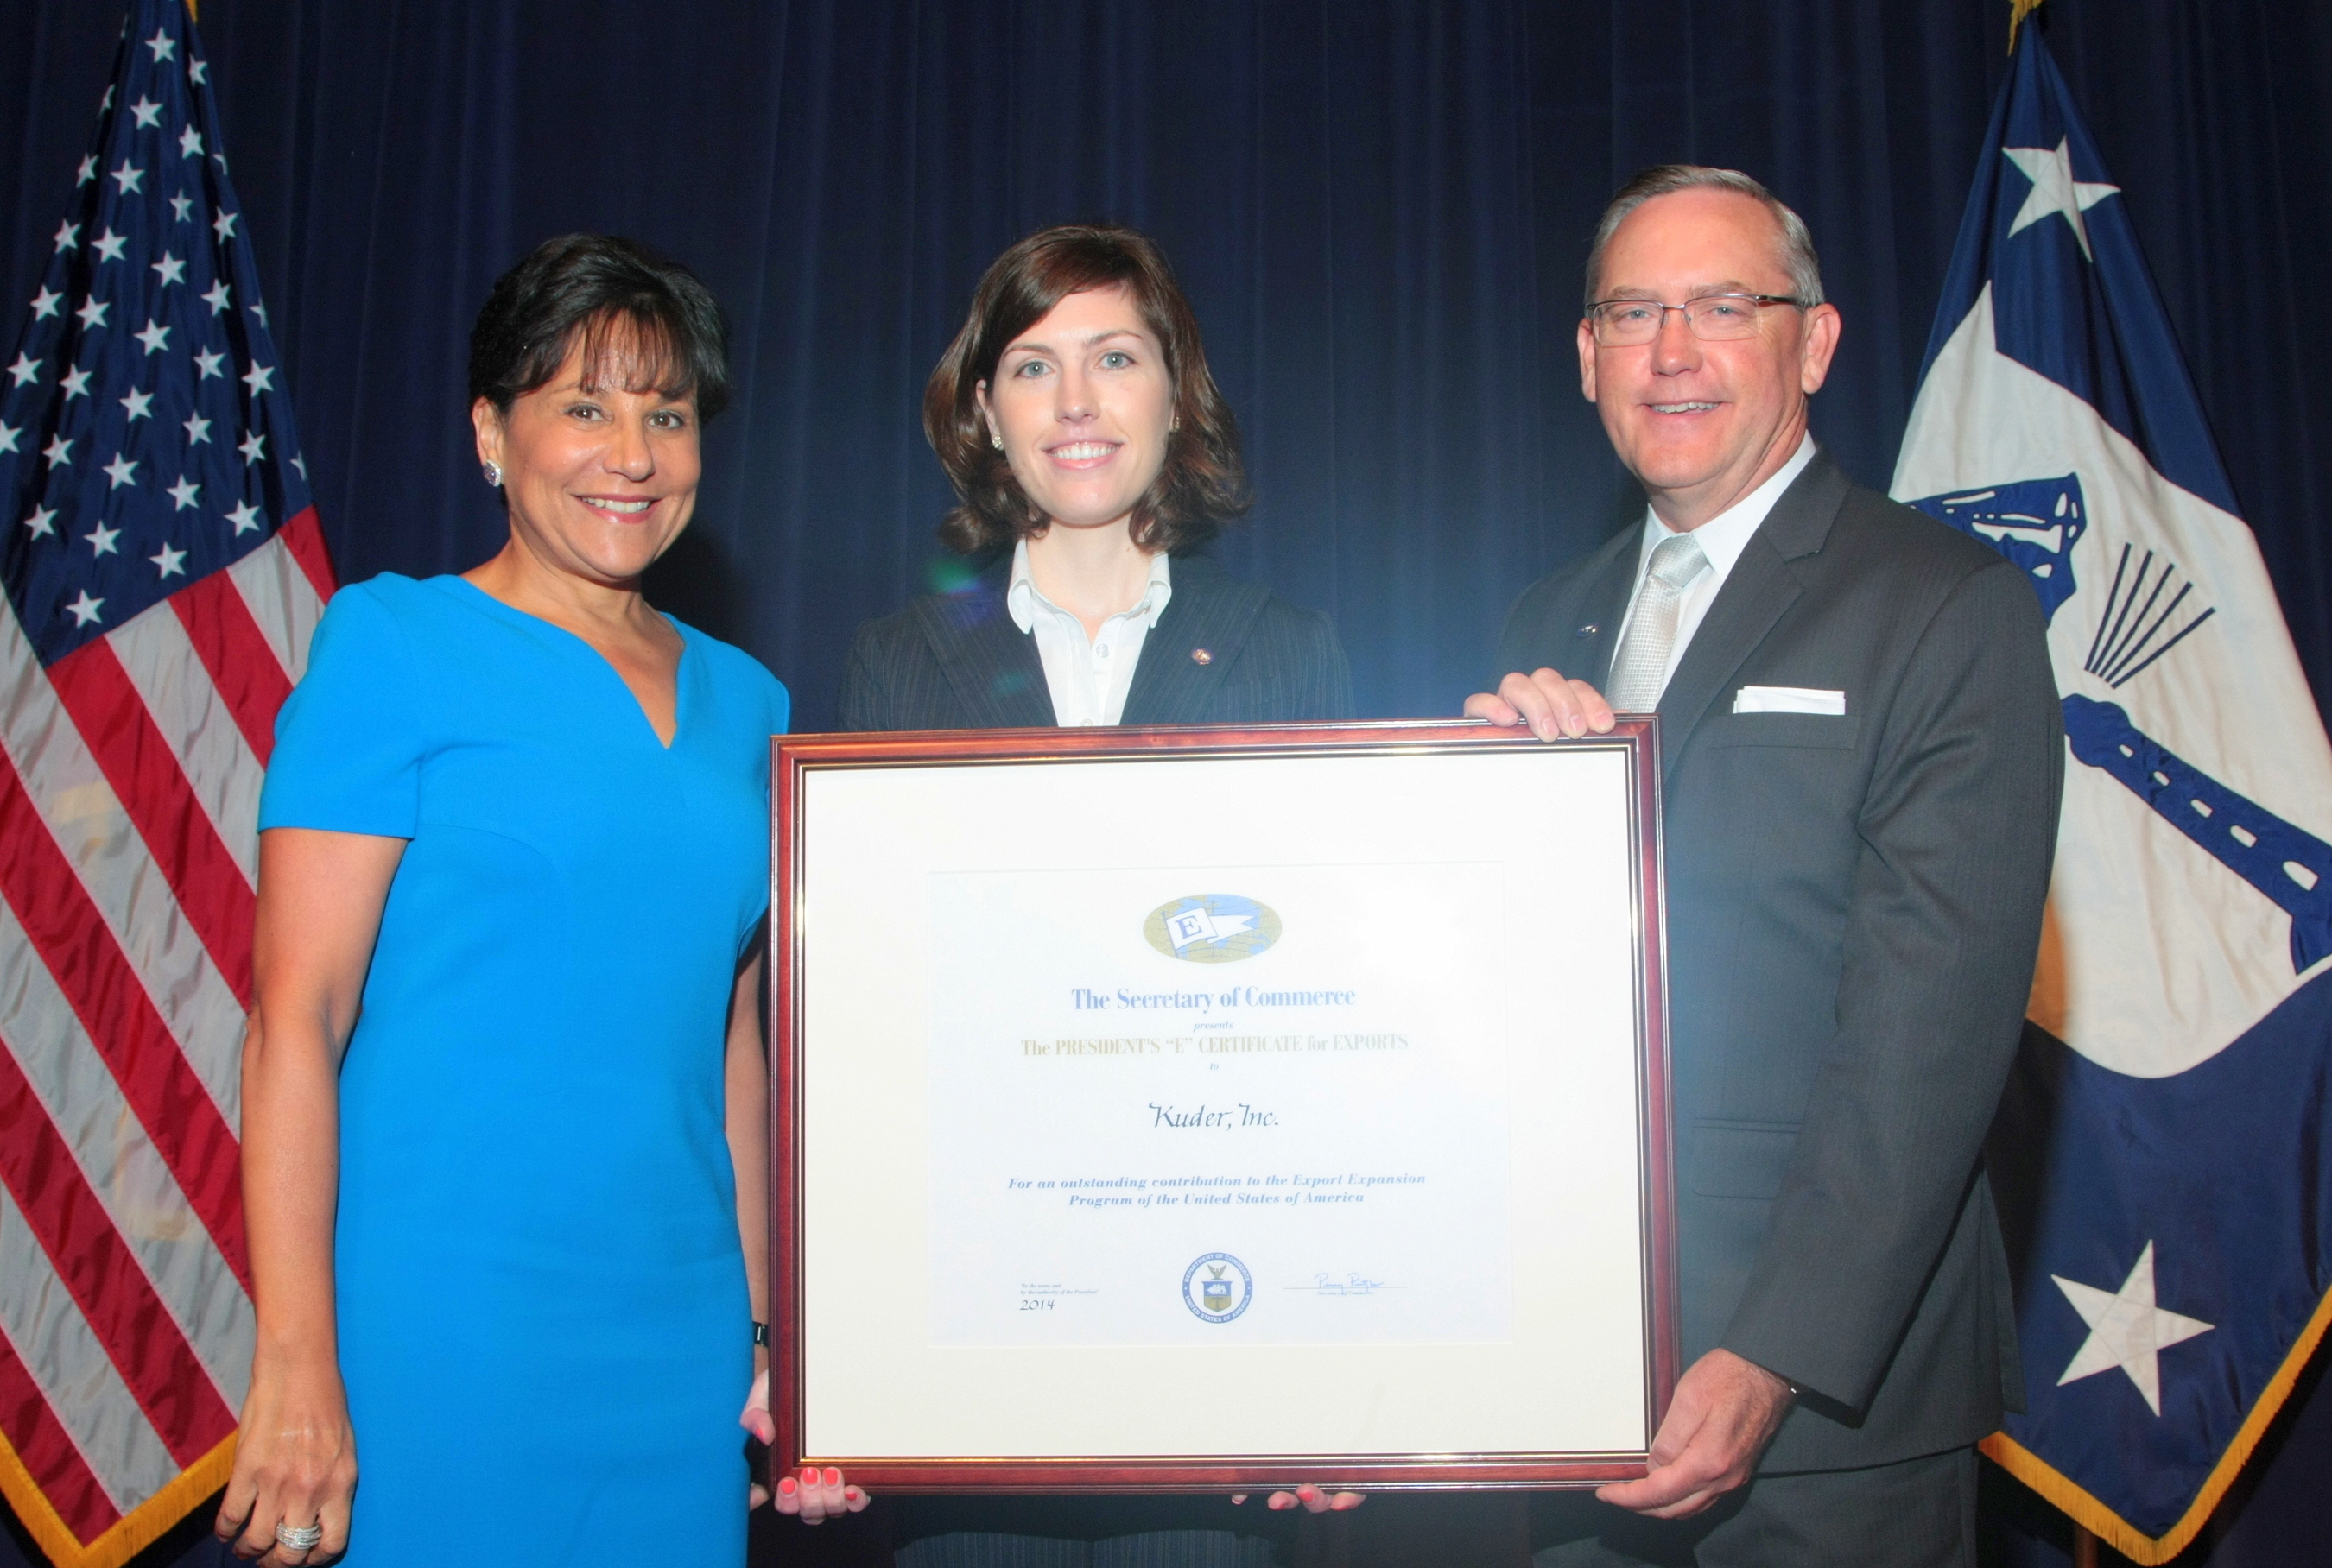 Pictured (left to right): U.S. Secretary of Commerce Penny Pritzker; Kuder Chief Strategy Officer Erin Milroy; and Kuder President and Founder Phil Harrington (PRNewsFoto/Kuder, Inc.)